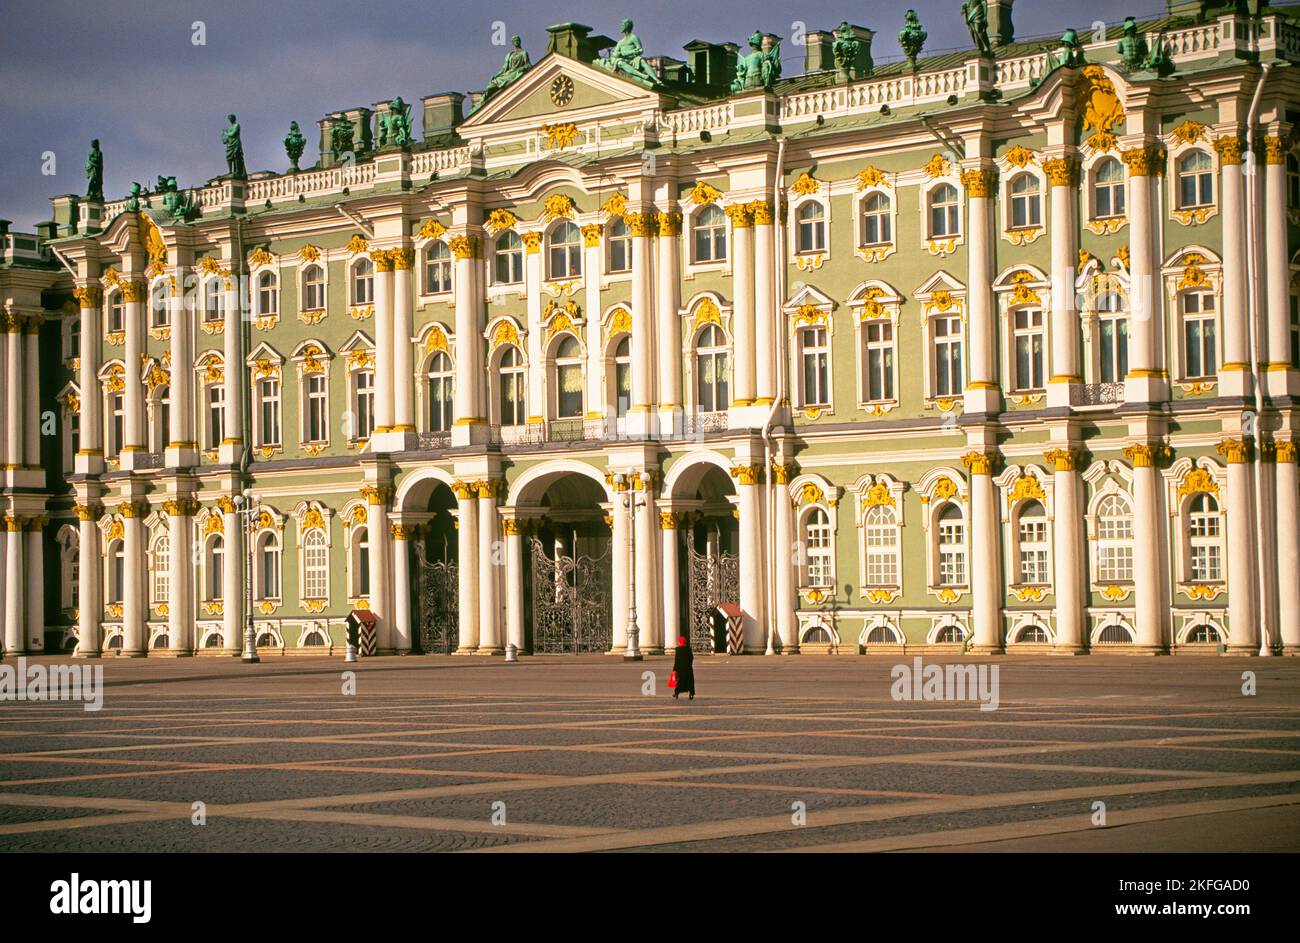 RUSSIA: ST. PETERSBURG: A view of the Hermitage Art Museum, once the Winter Palace, the residence of the Russian tsars that was built to the design of Francesco Bartolomeo Rastrelli in 1754-62 Stock Photo